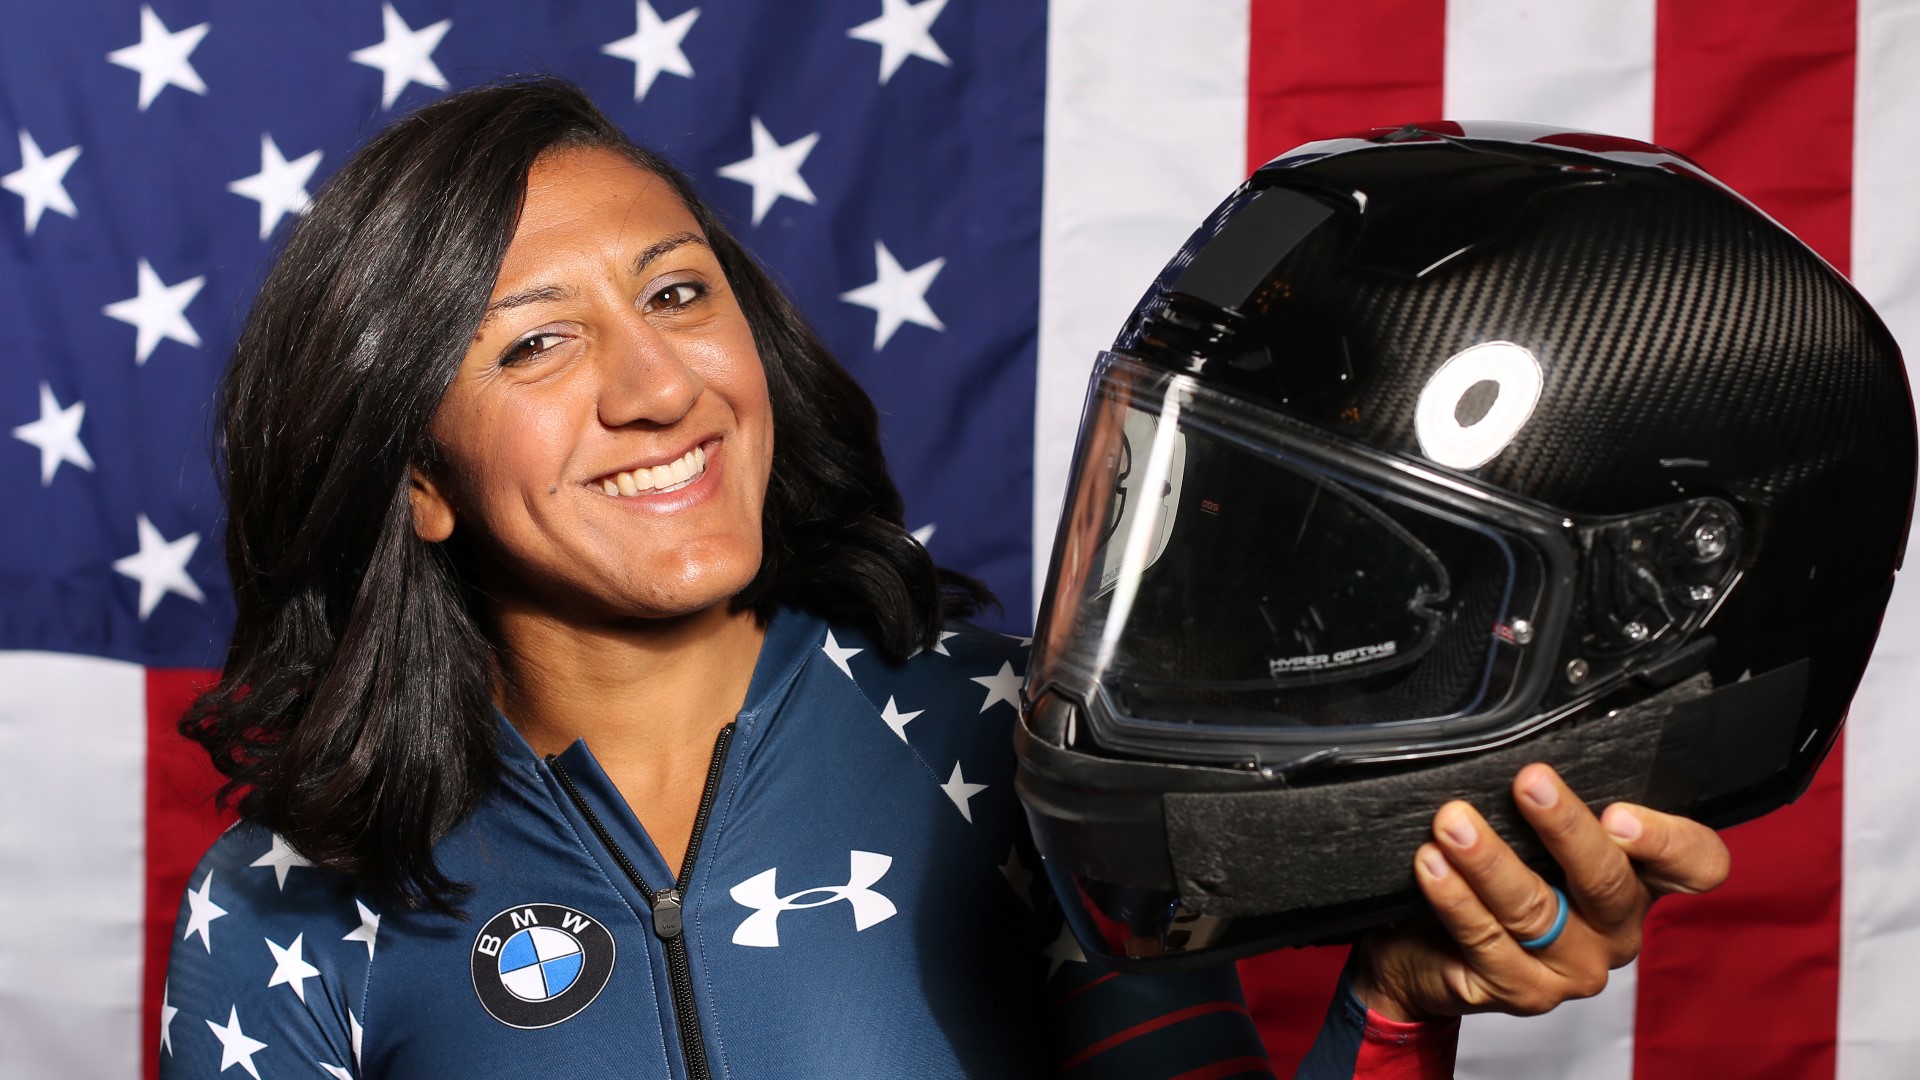 Four-time Olympian Elana Meyers Taylor from Douglasville traveled to the Winter Games with her husband and young son on Jan. 27. Two days later, she tested positive.